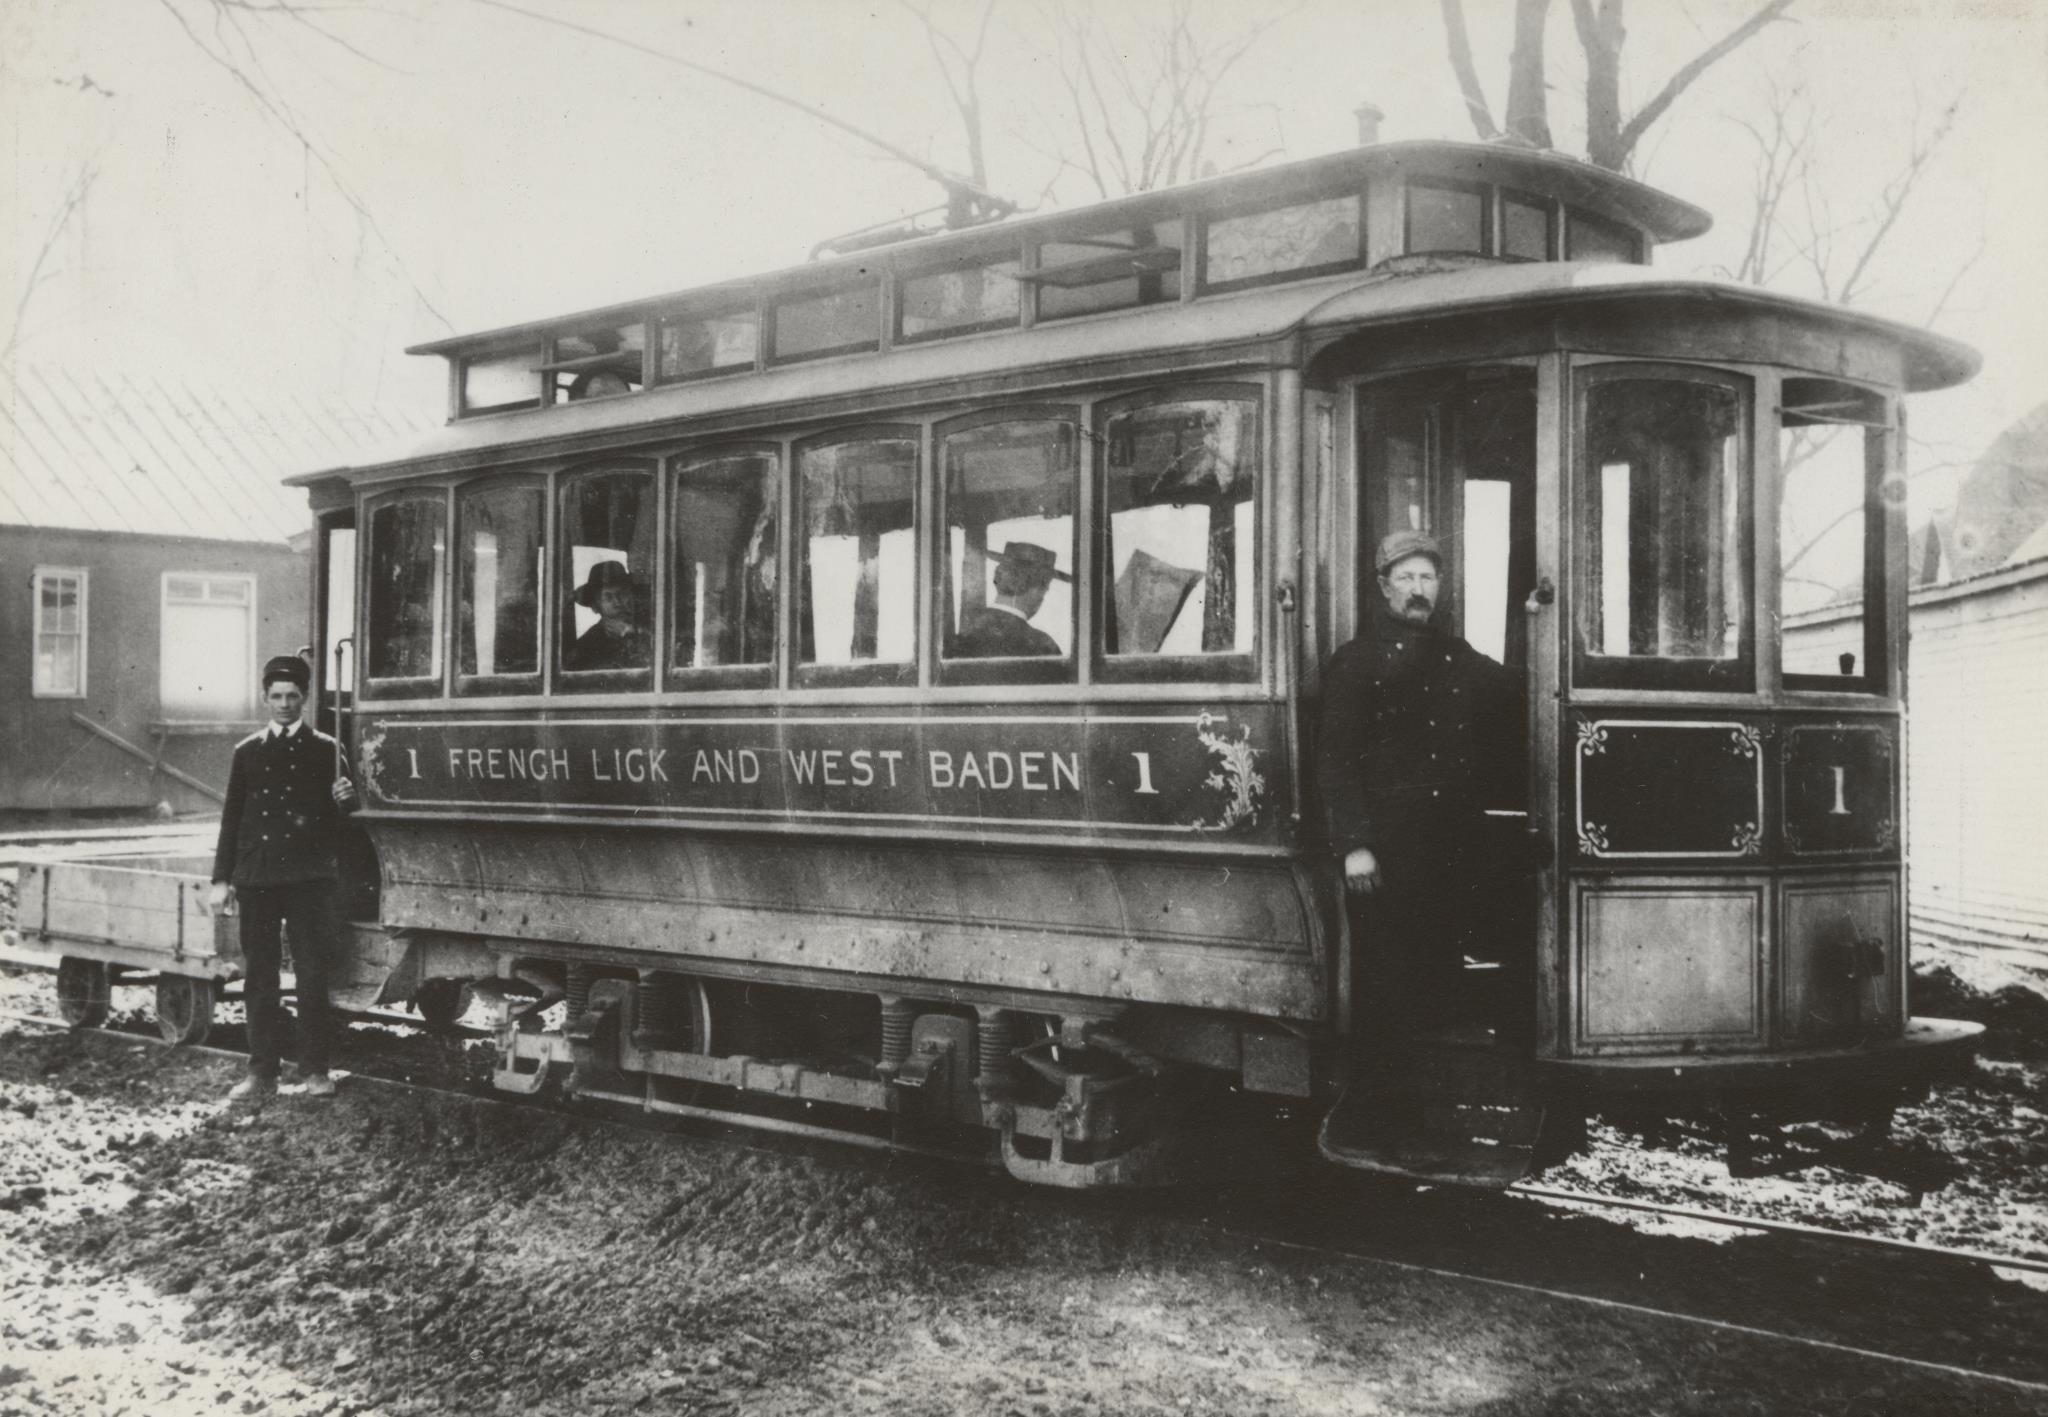 Trolley at French Lick Resort